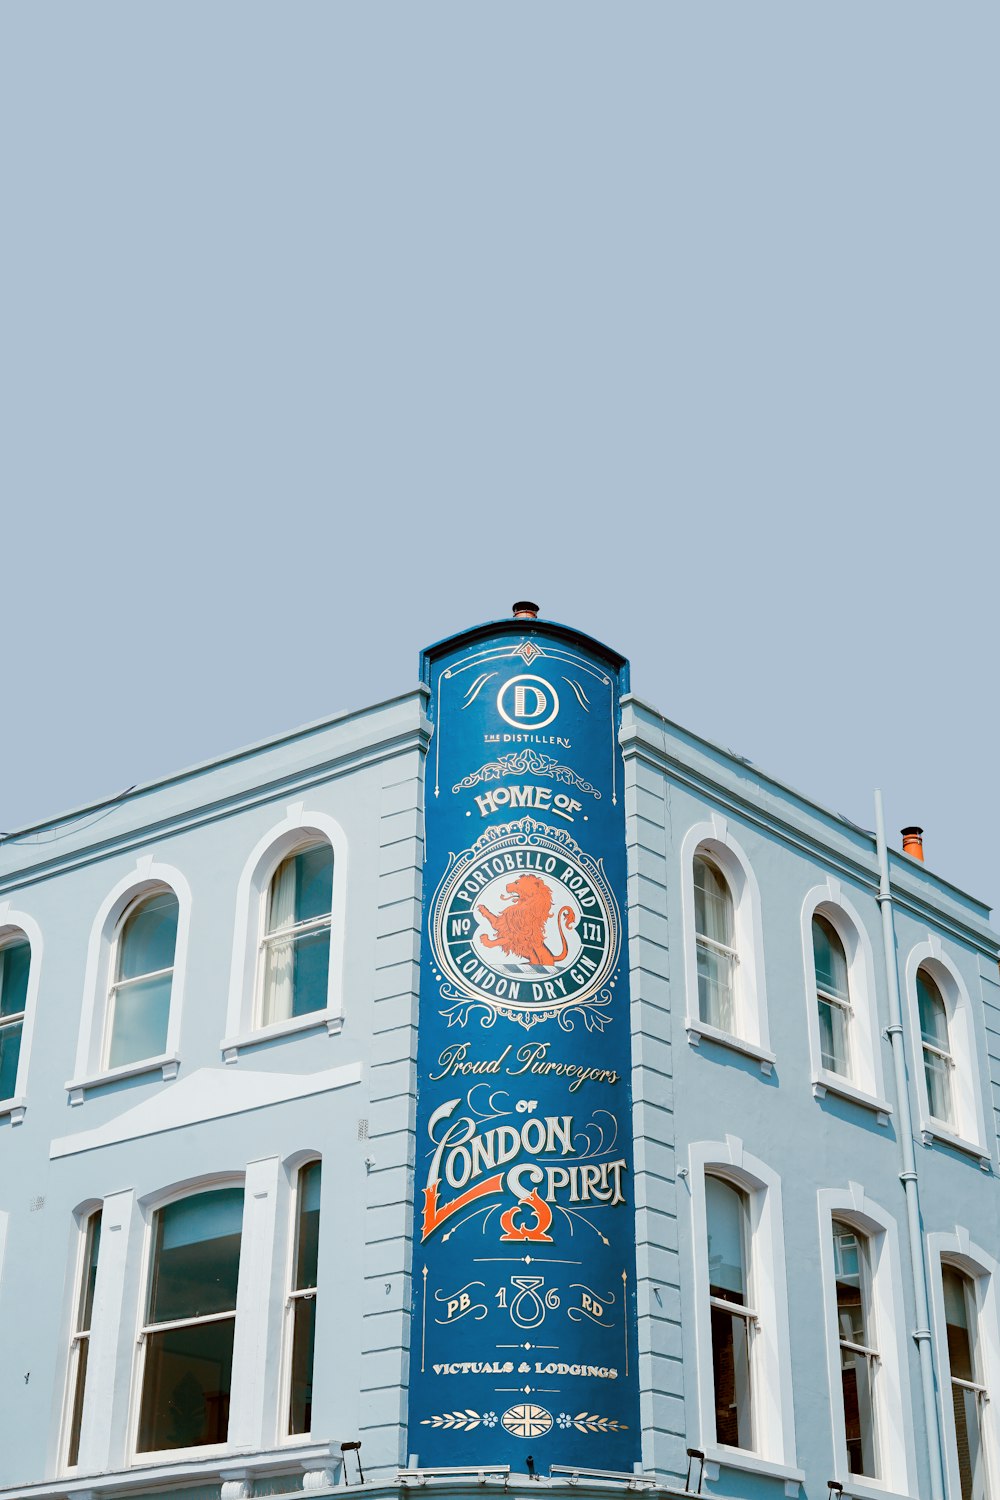 blue Home of Proud of London Spirit banner